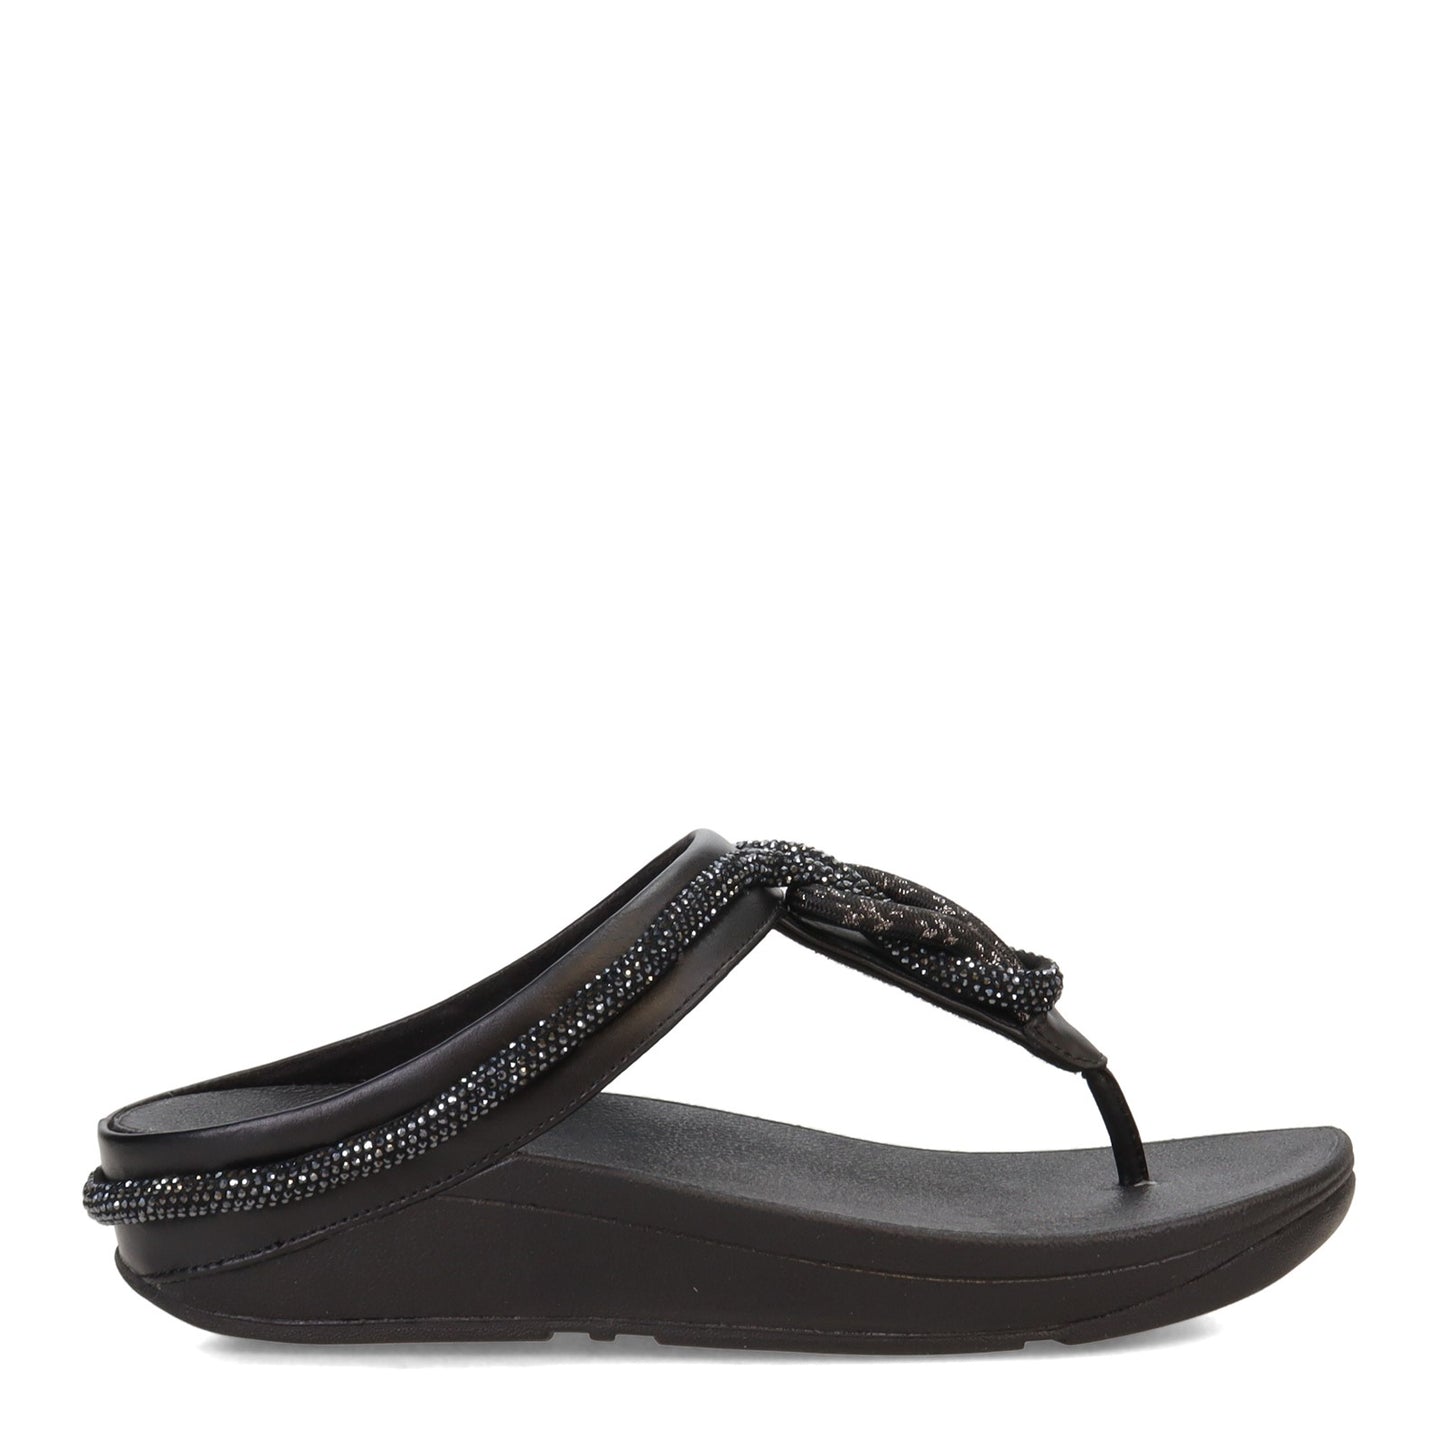 FITFLOP FINO SANDAL BLACK WITH GEMS